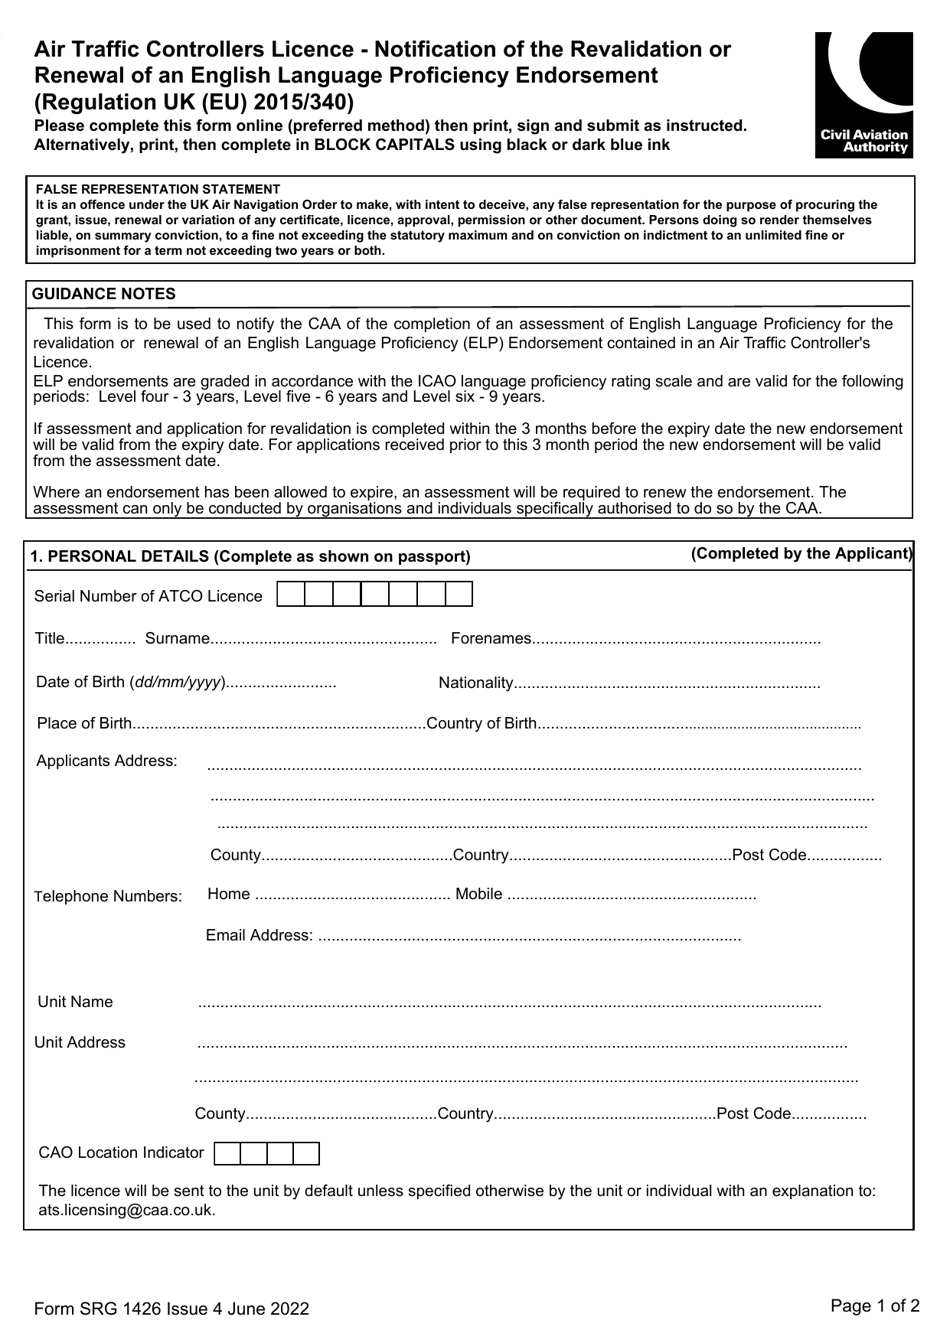 Form SRG1426 Air Traffic Controllers Licence - Notification of the Revalidation or Renewal of an English Language Proficiency Endorsement - United Kingdom, Page 1